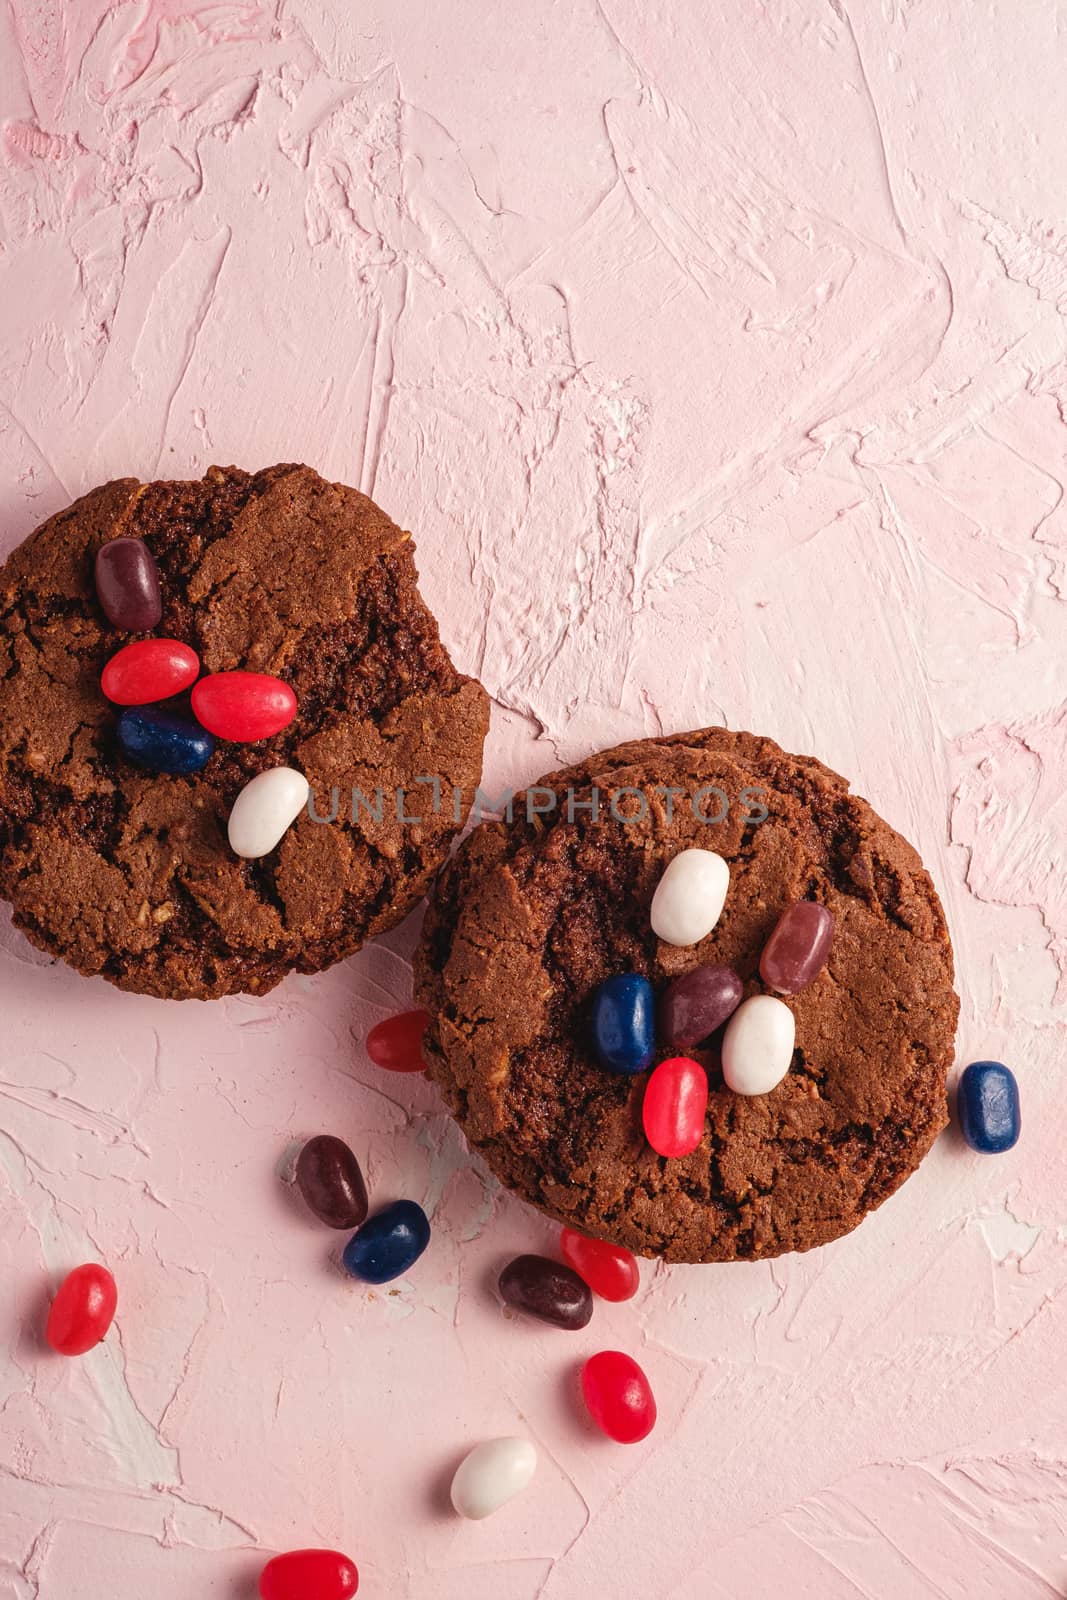 Homemade oat chocolate cookies with cereal with juicy jelly beans on textured pink background, top view copy space